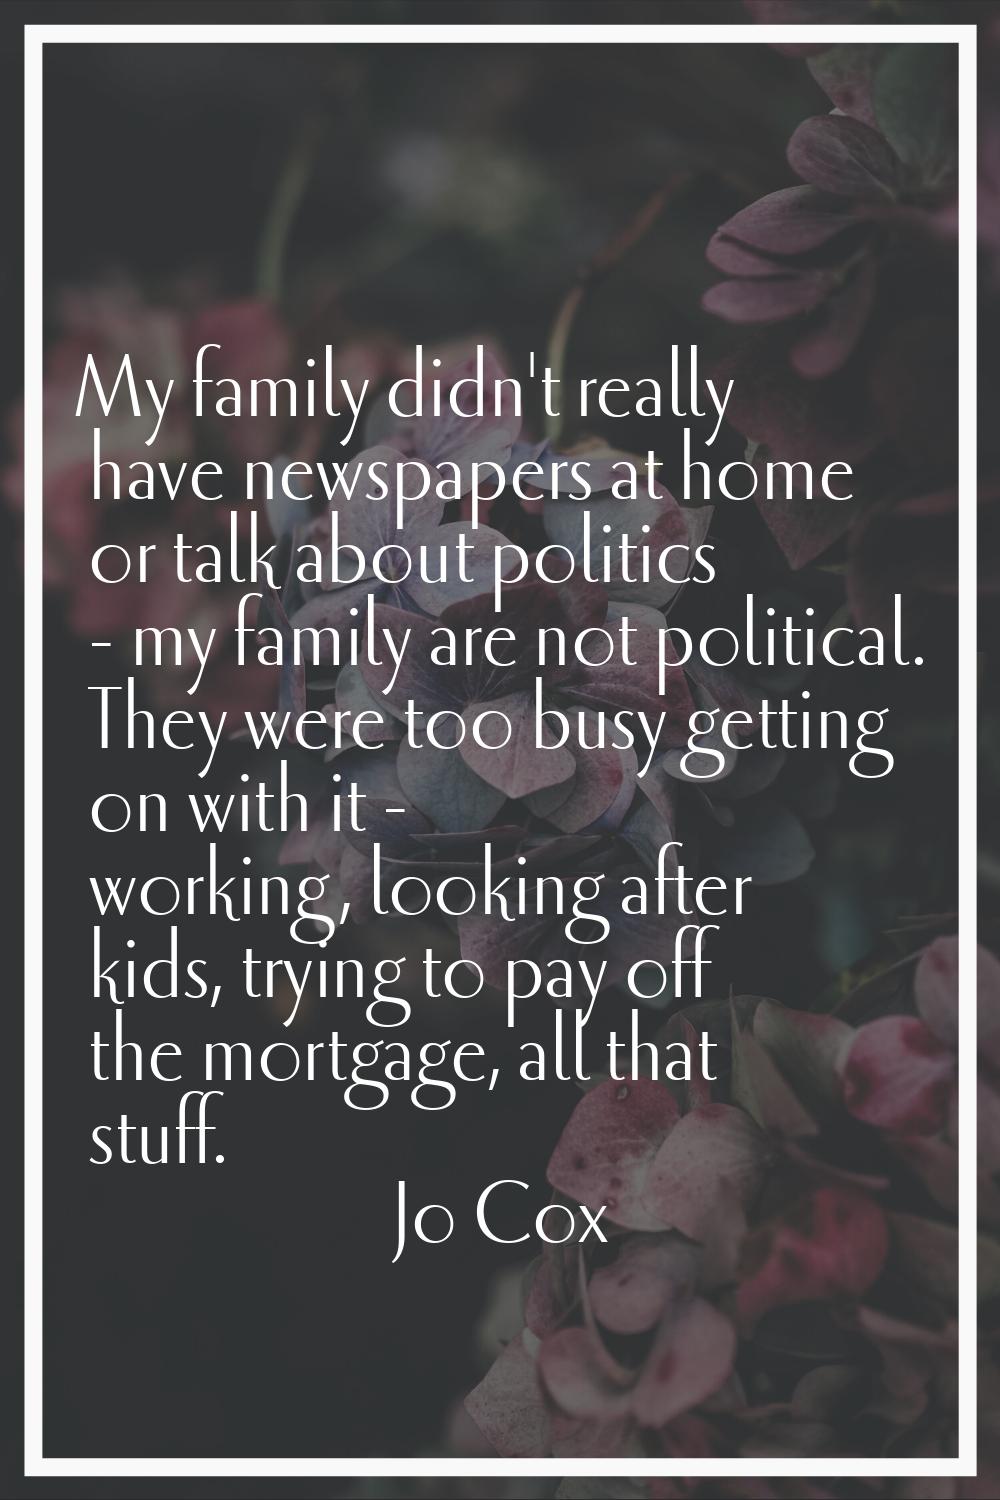 My family didn't really have newspapers at home or talk about politics - my family are not politica